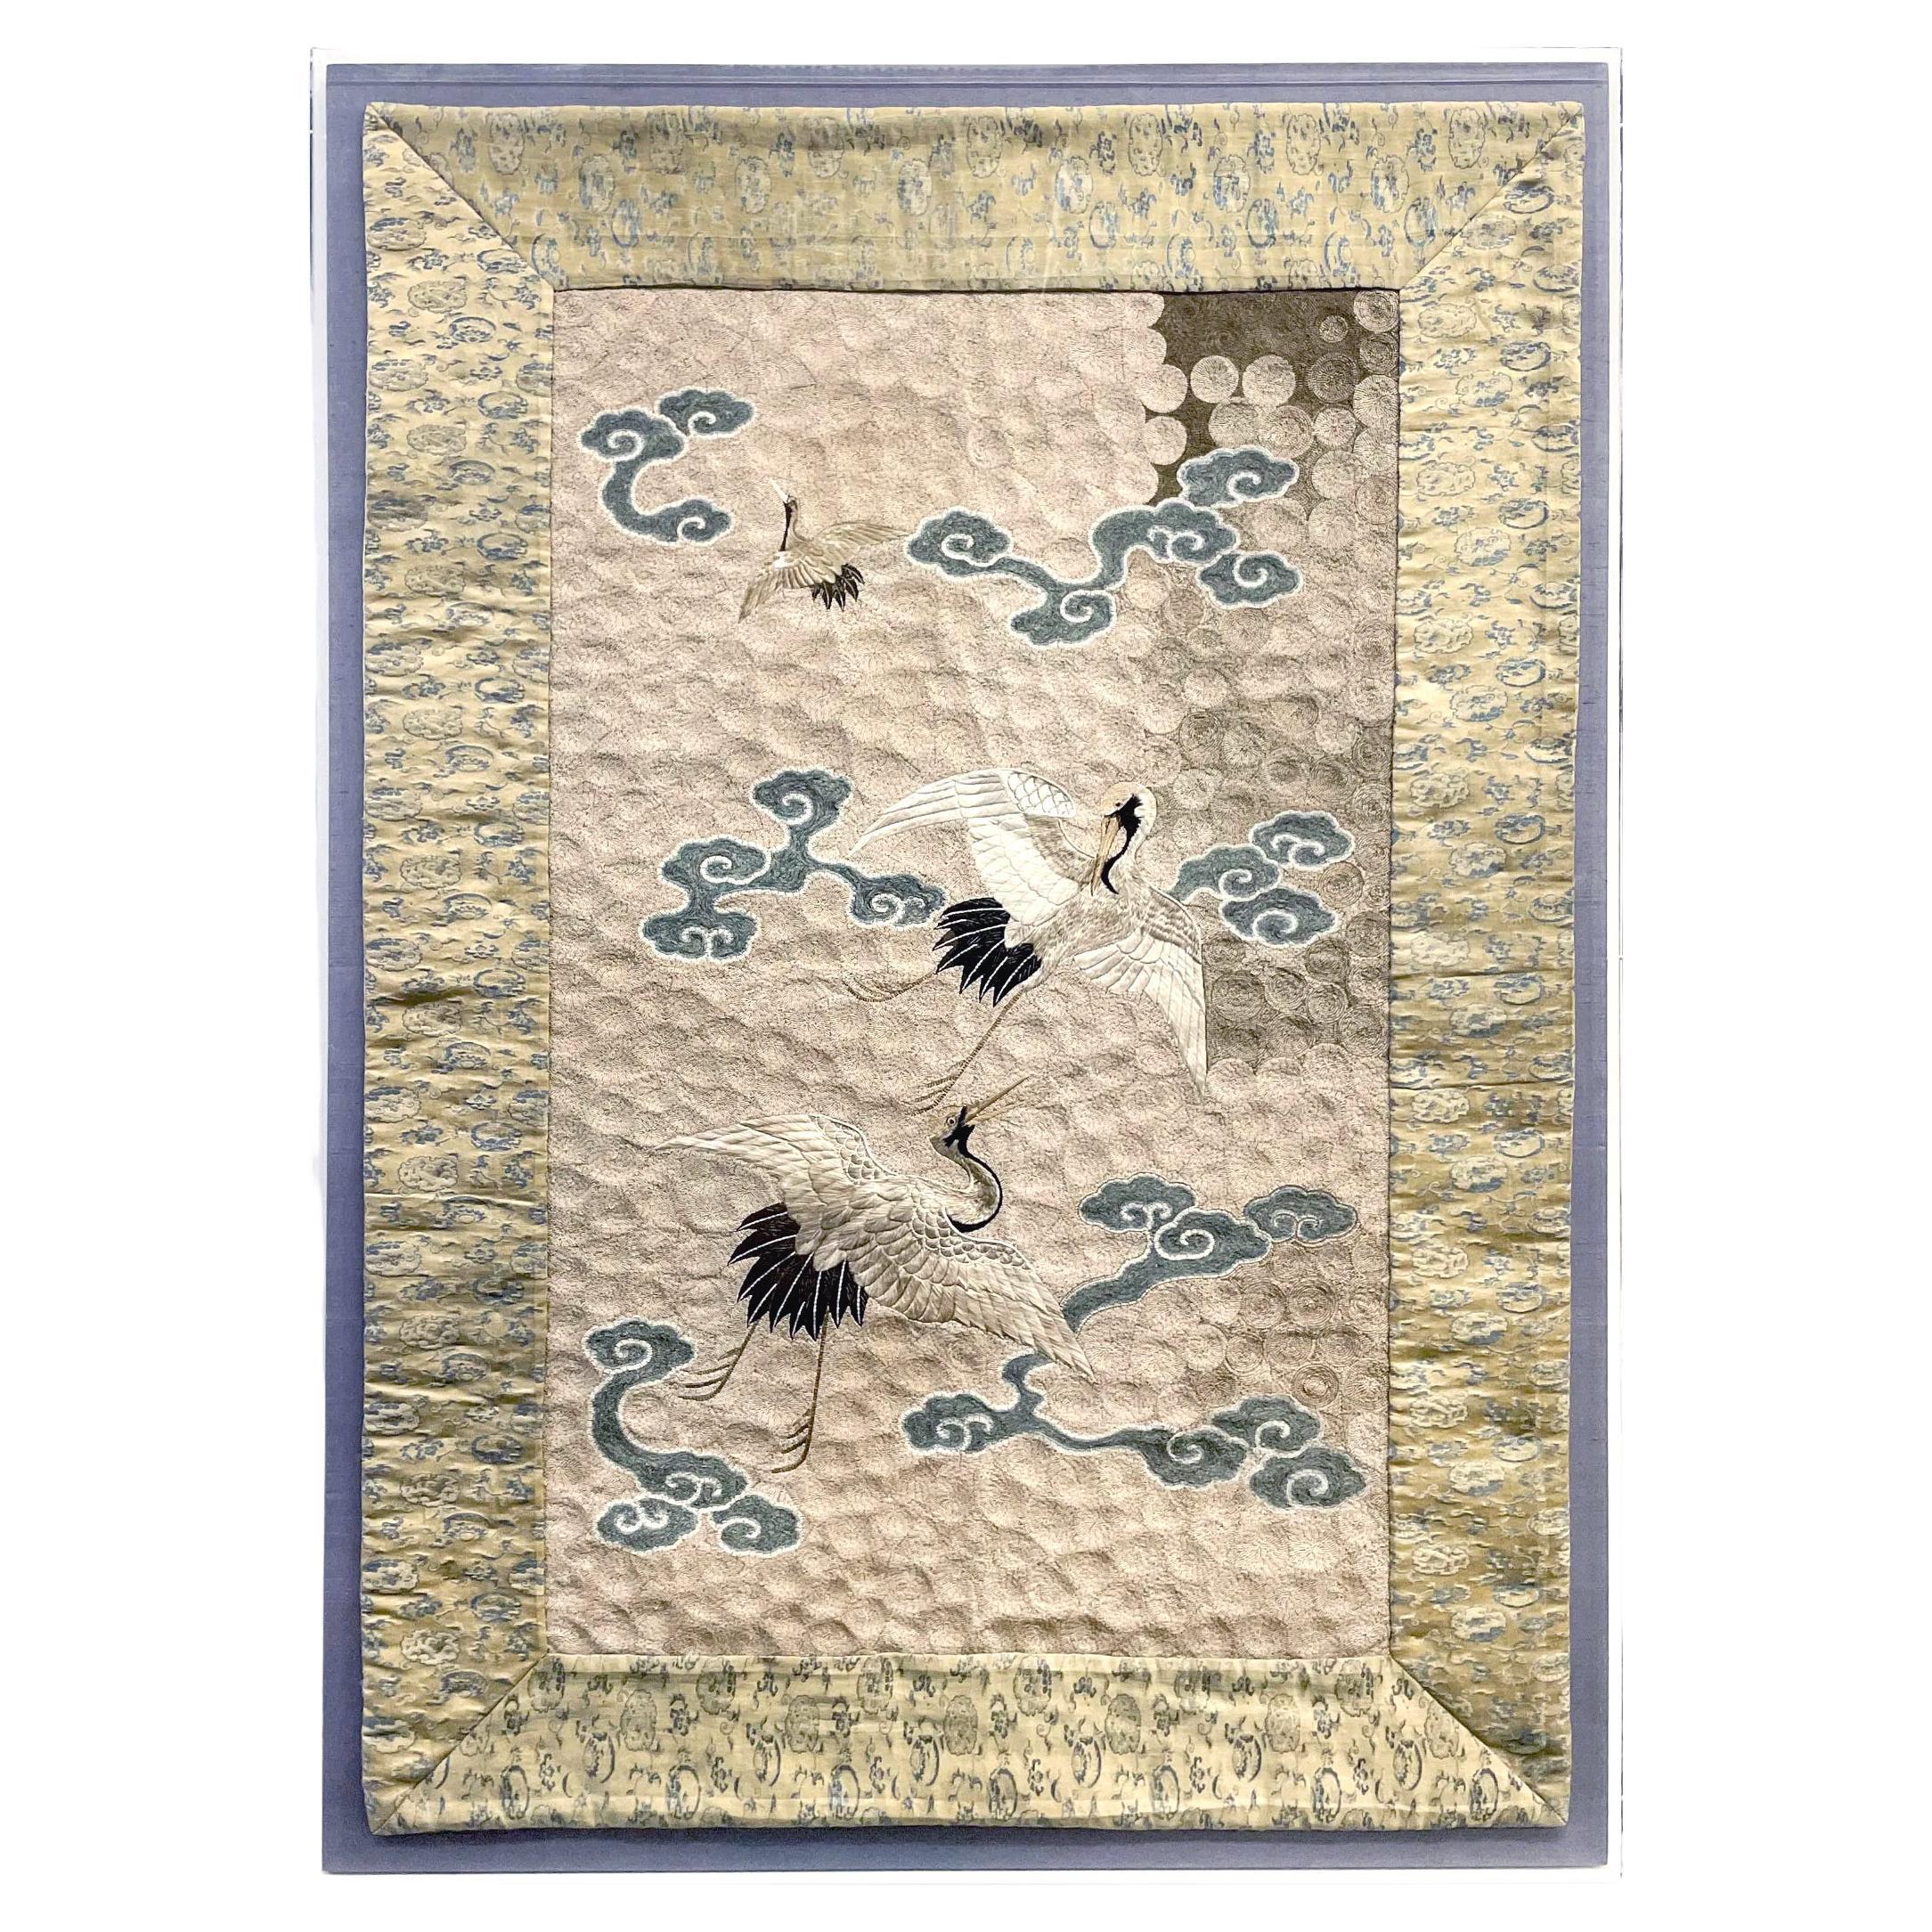 Framed Japanese Embroidery Textile Panel Meiji Period